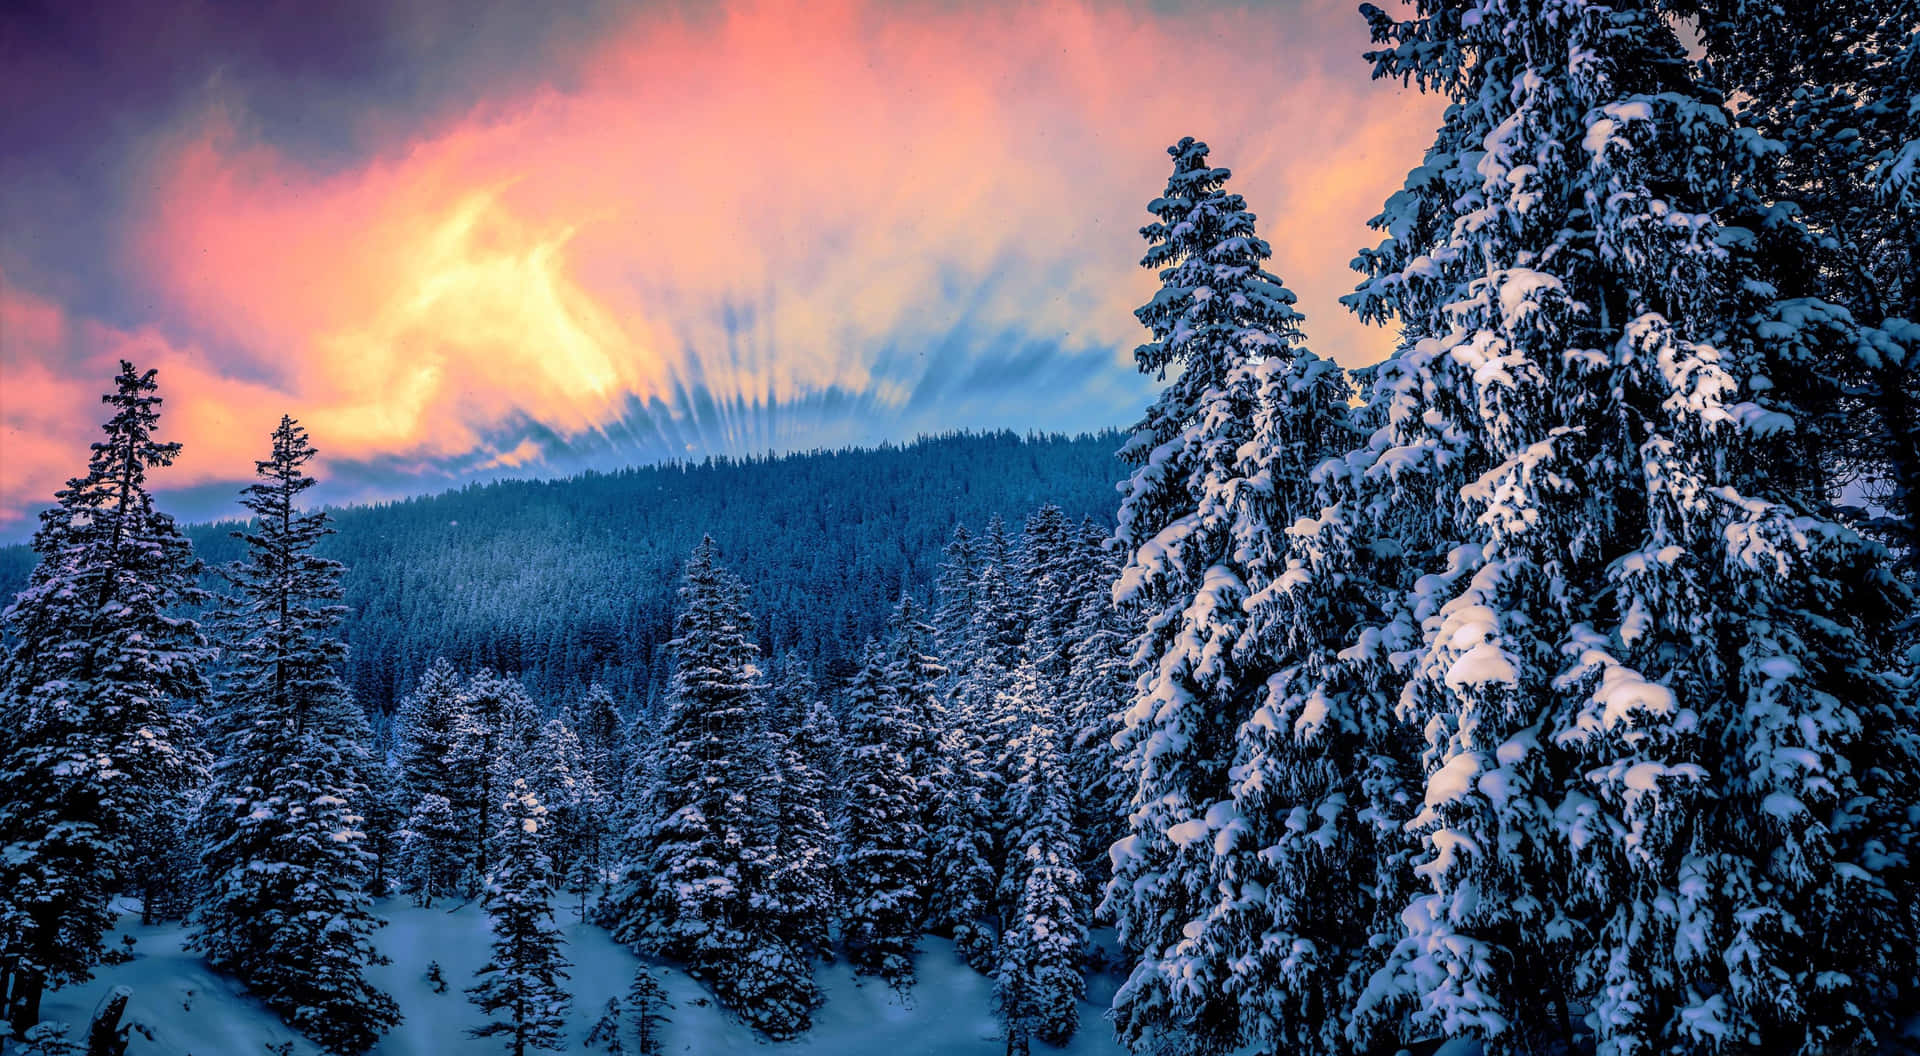 “A magical winter forest bursting with life and beauty” Wallpaper